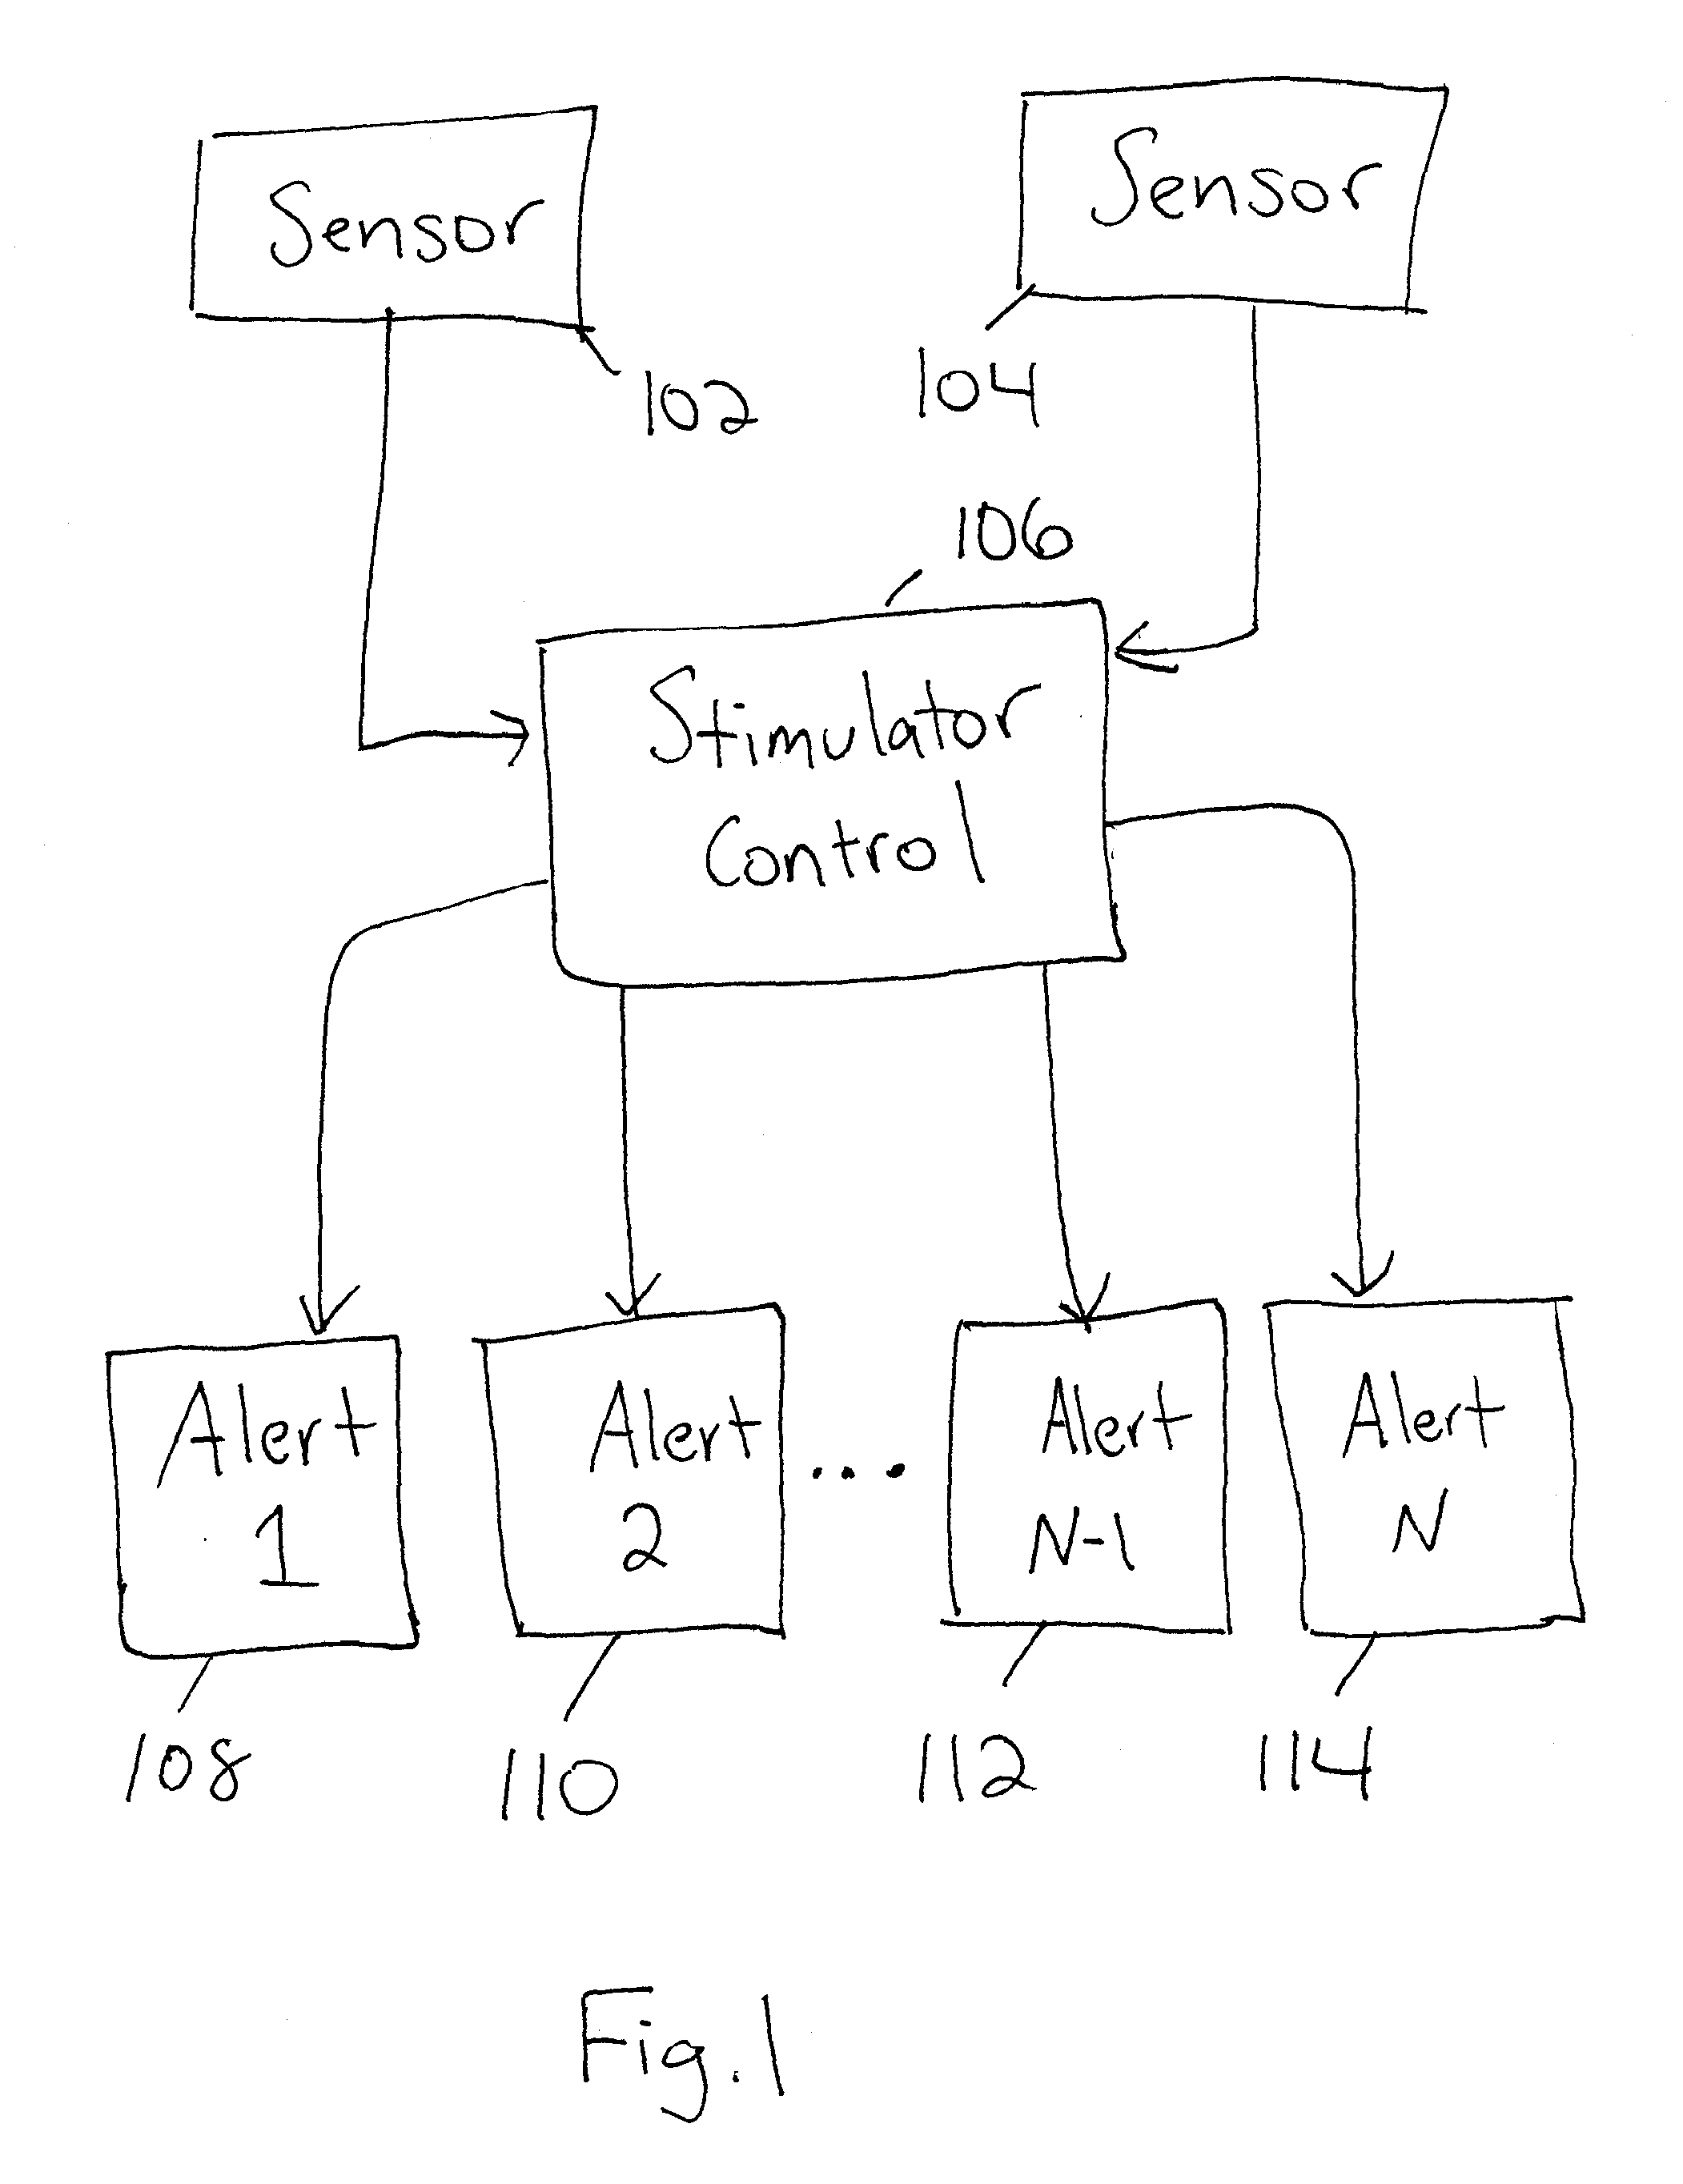 Object detection device